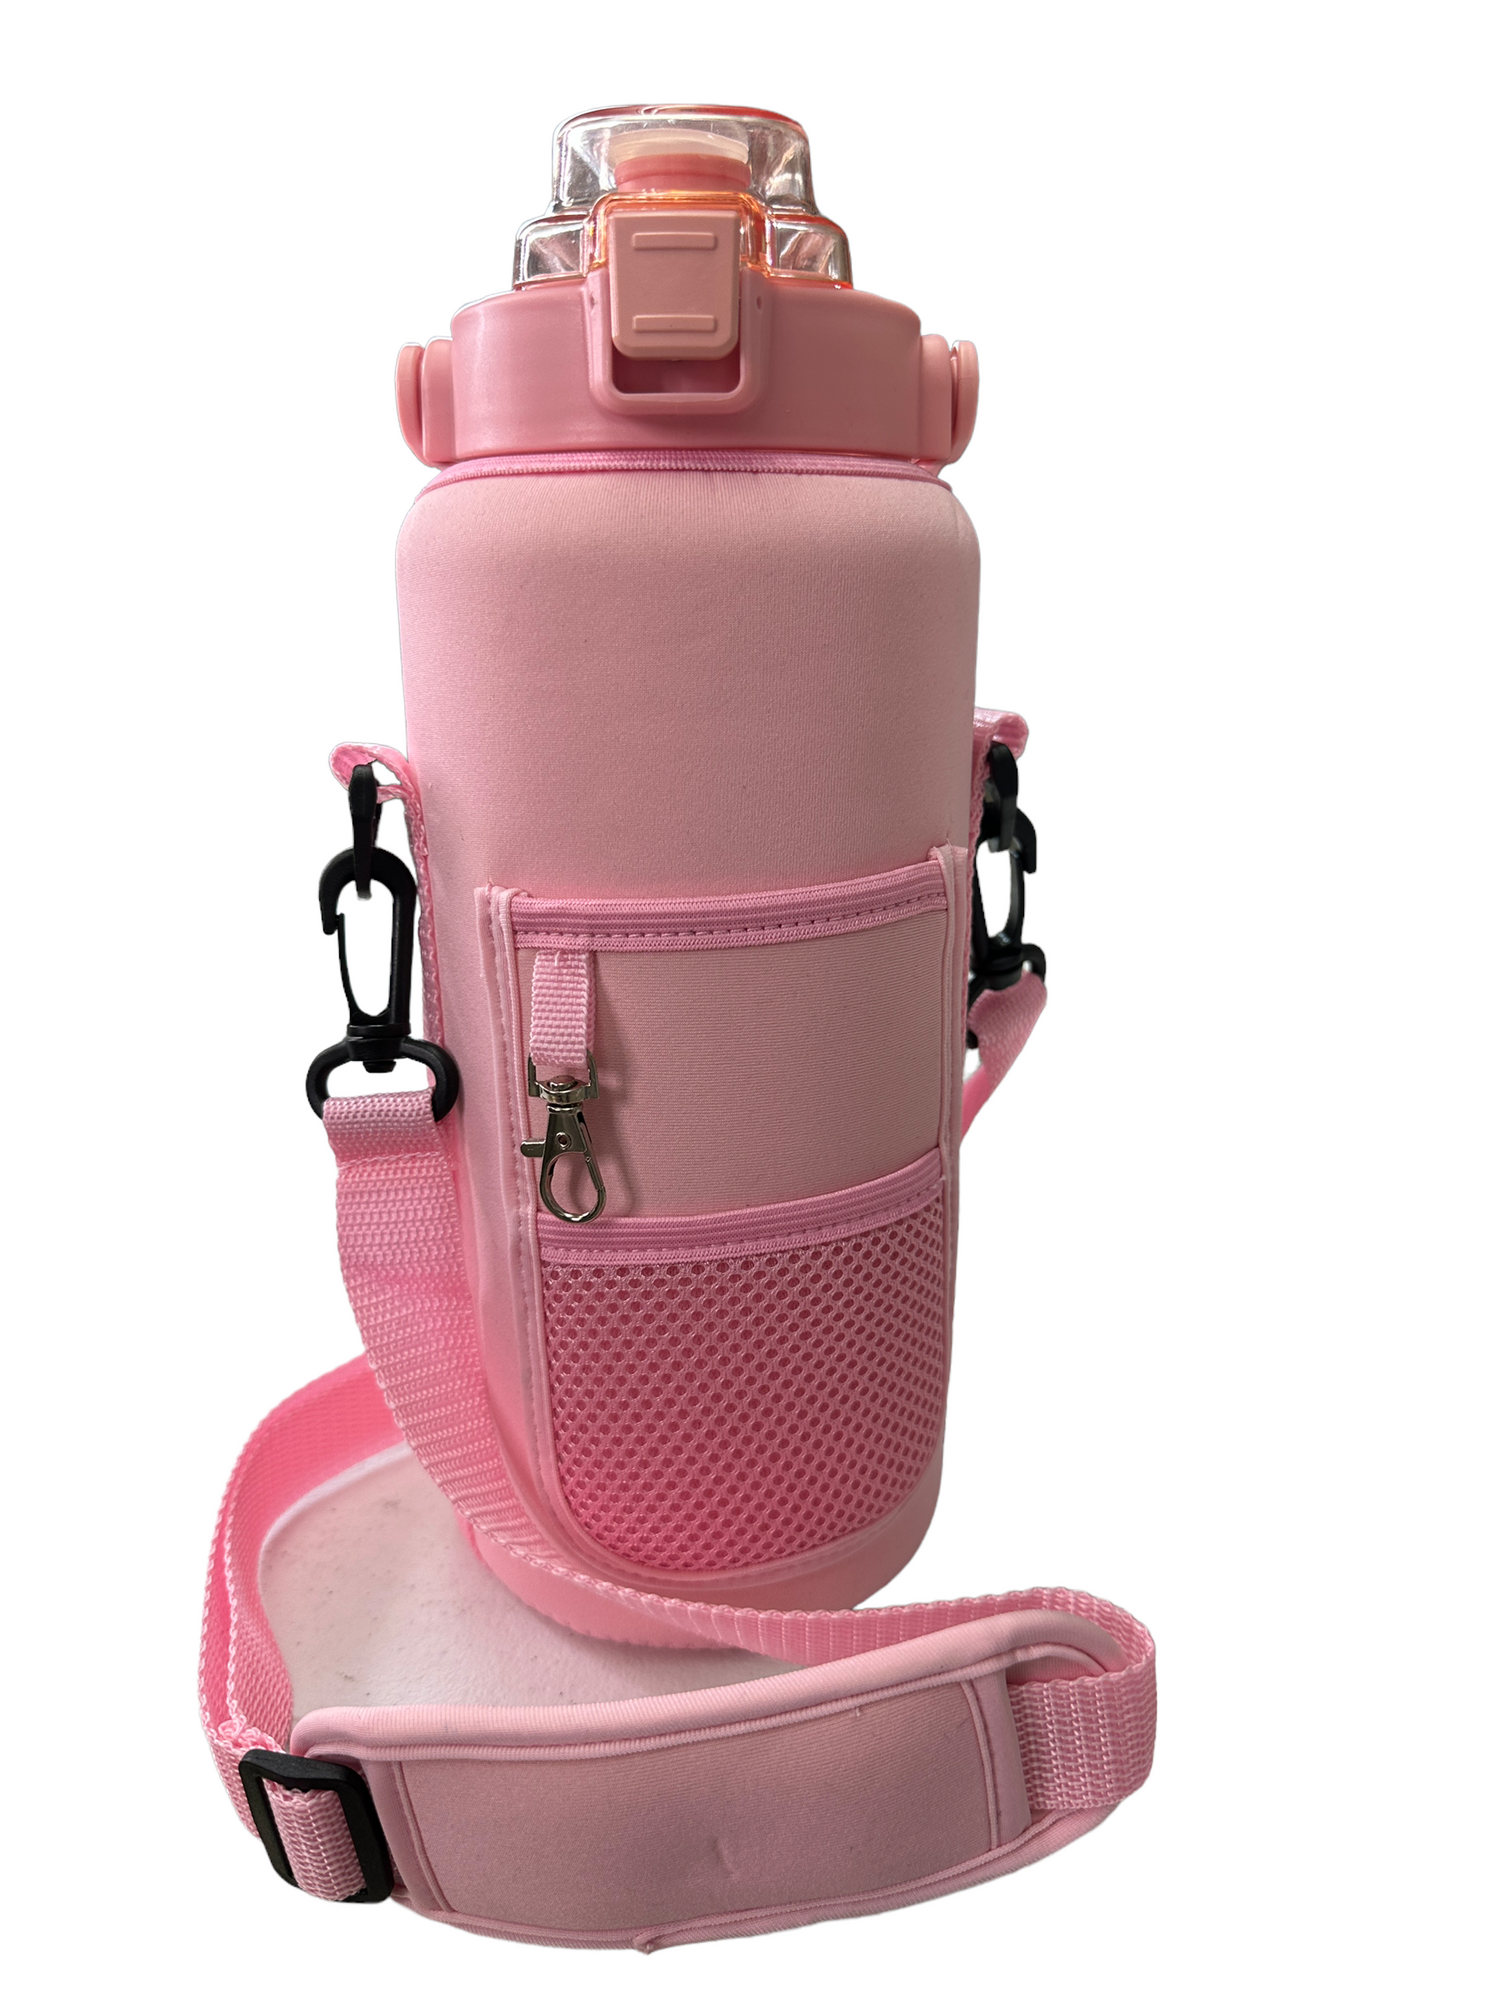 Water Bottle with Carrier